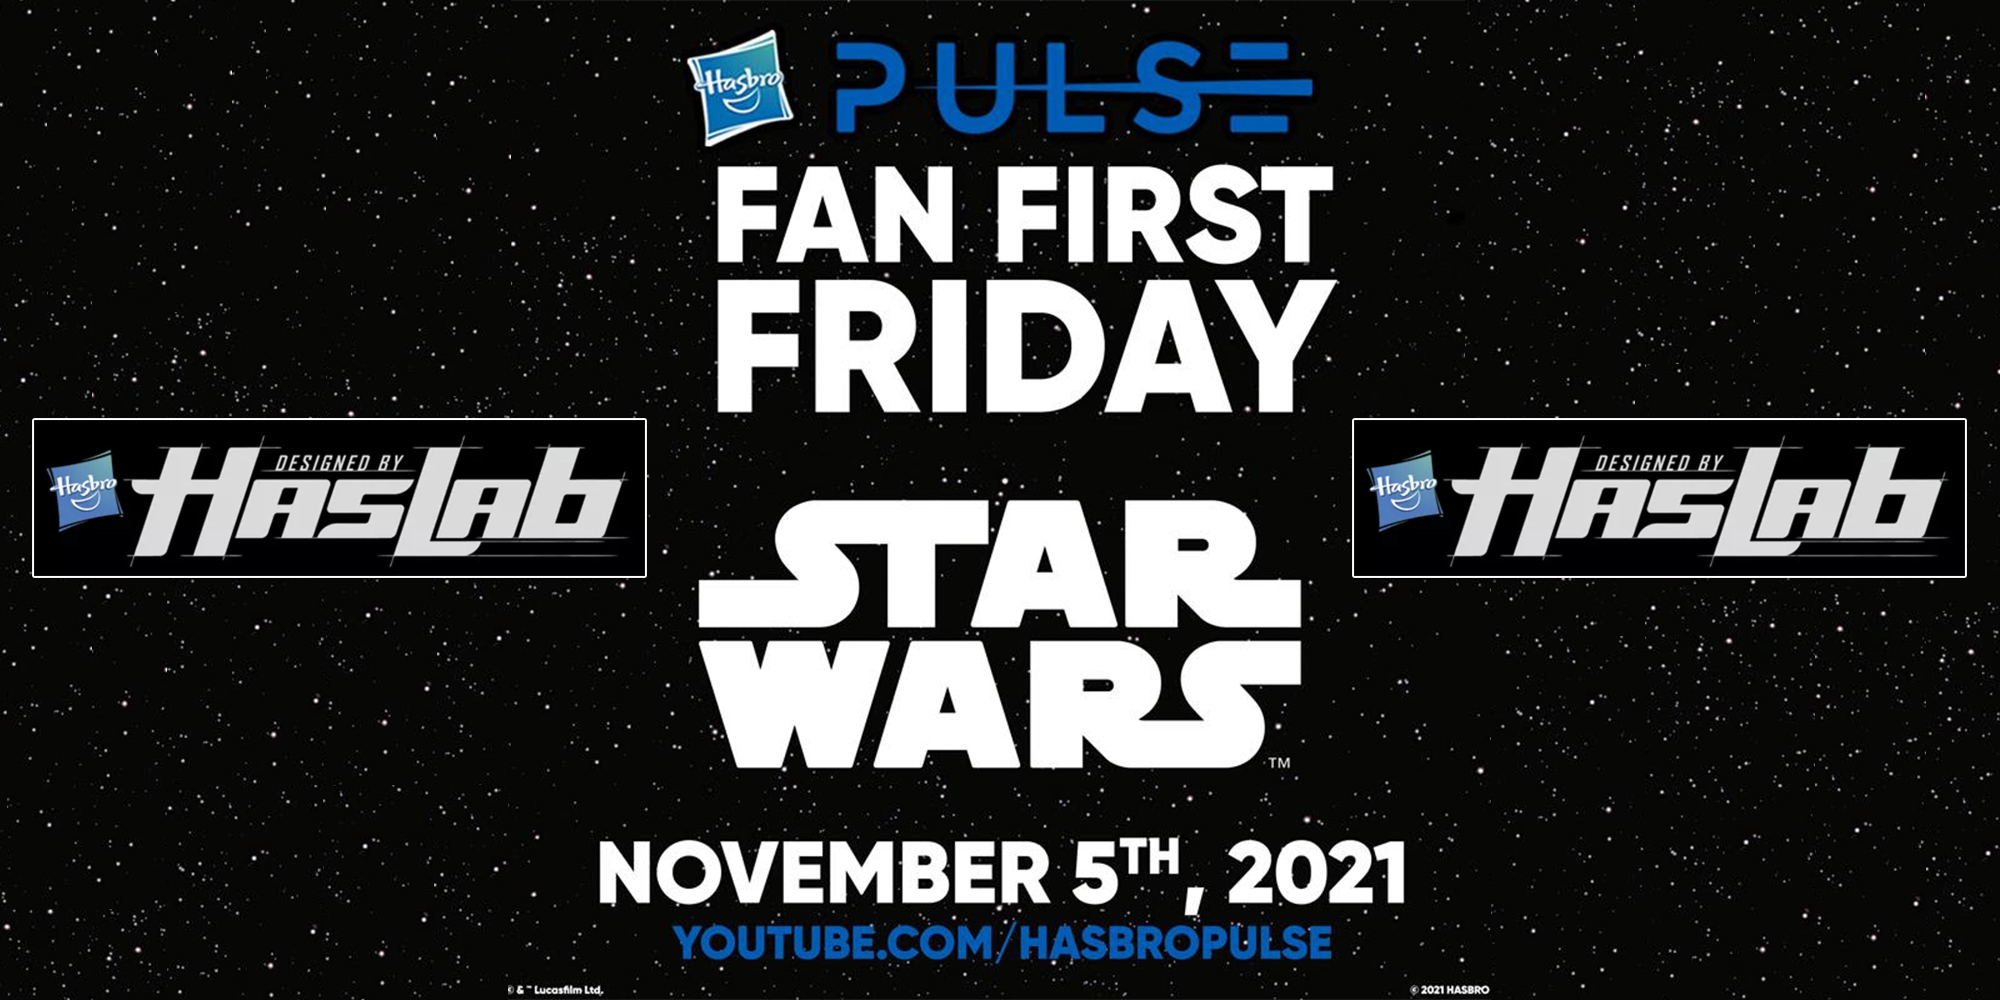 Tune In To Fan First Friday This Week!